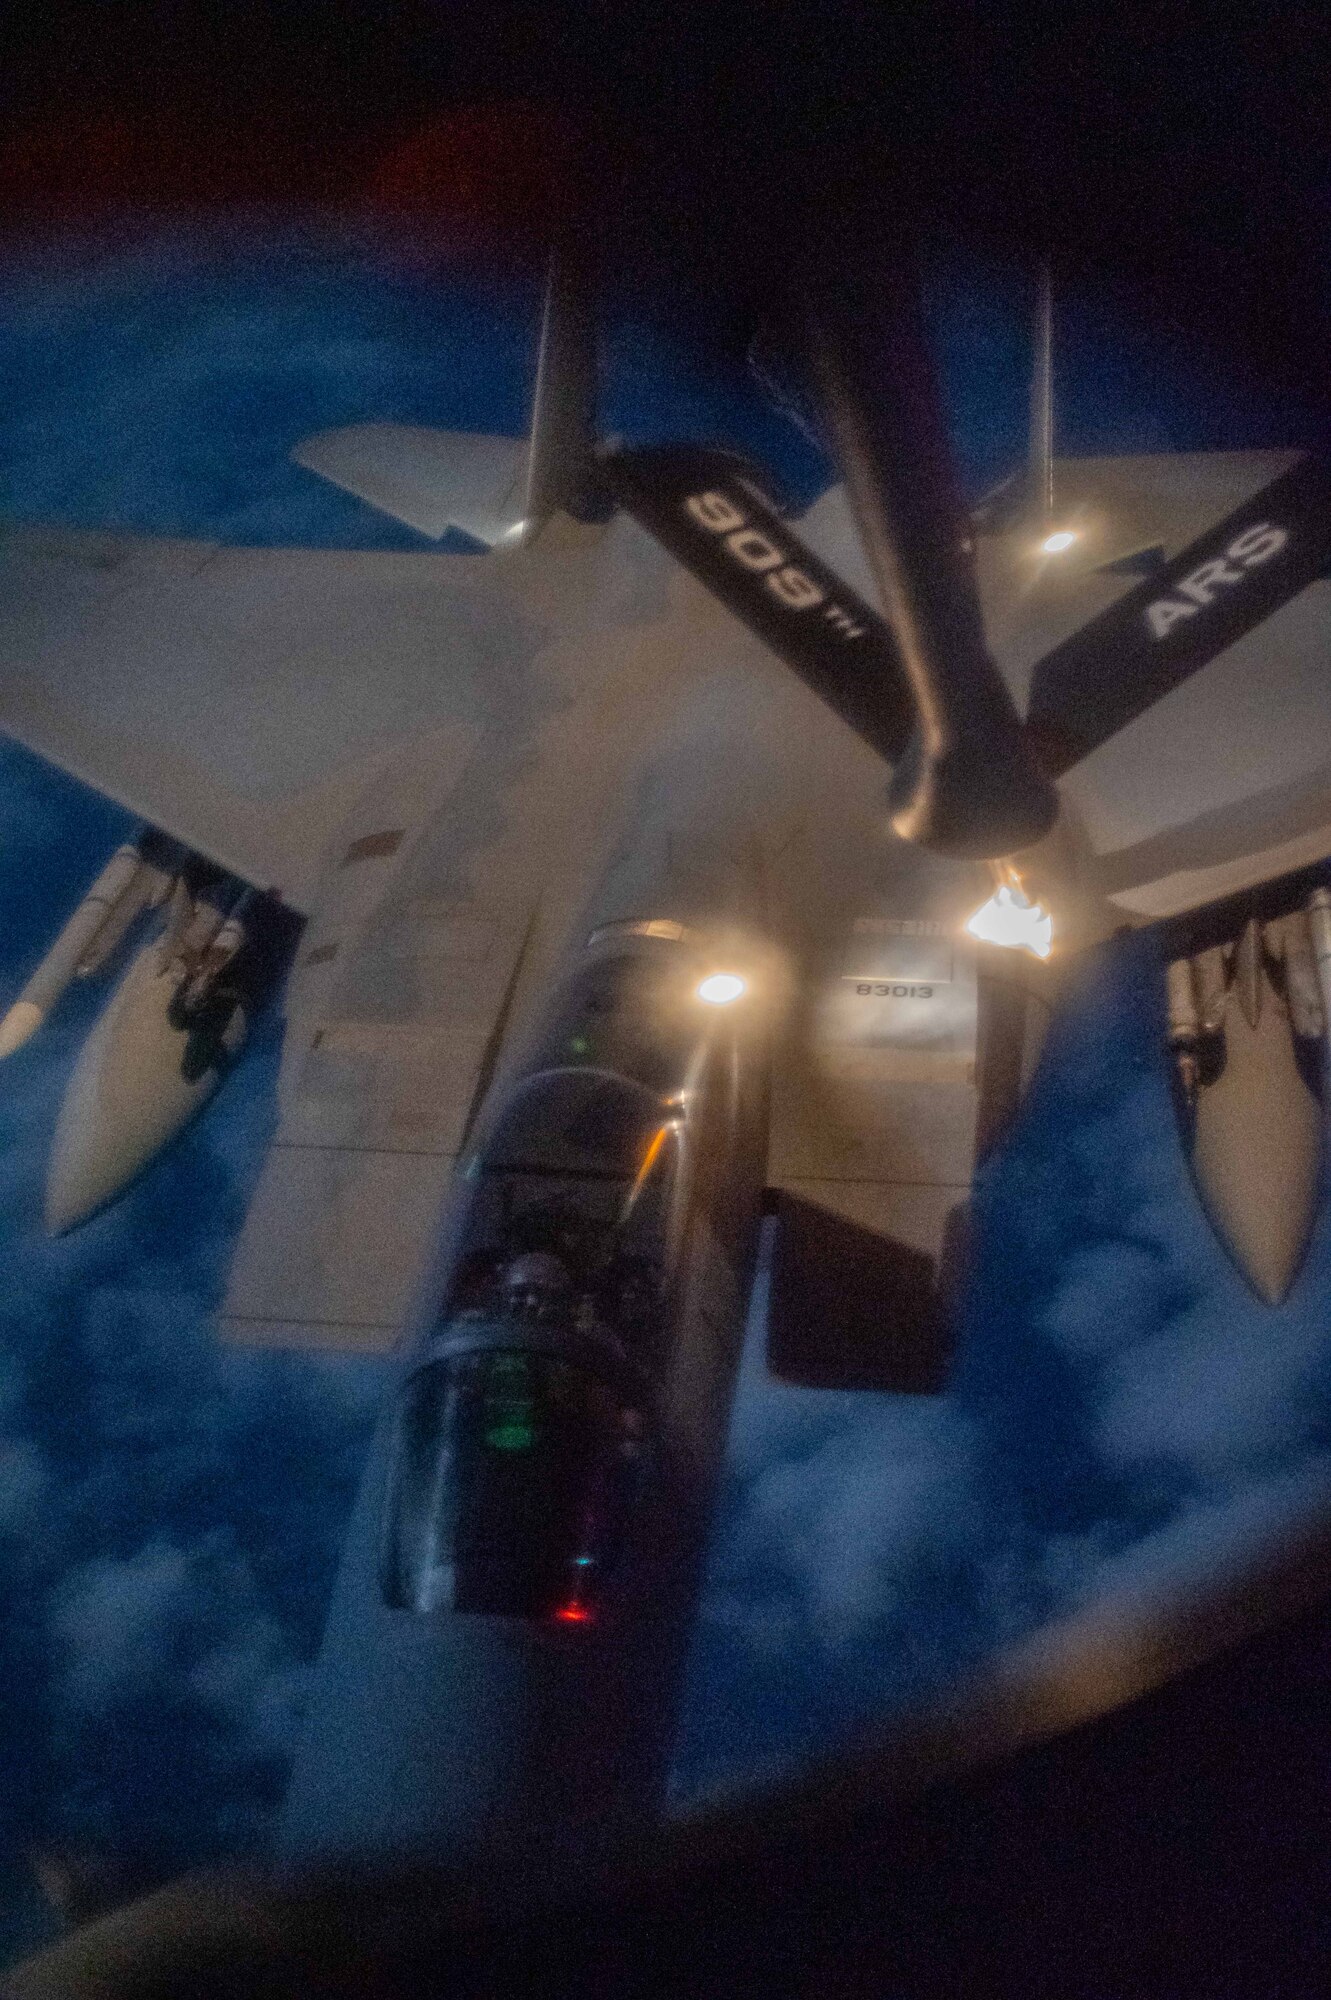 A fighter jet gets refueled by a KC-135 Stratotanker at night